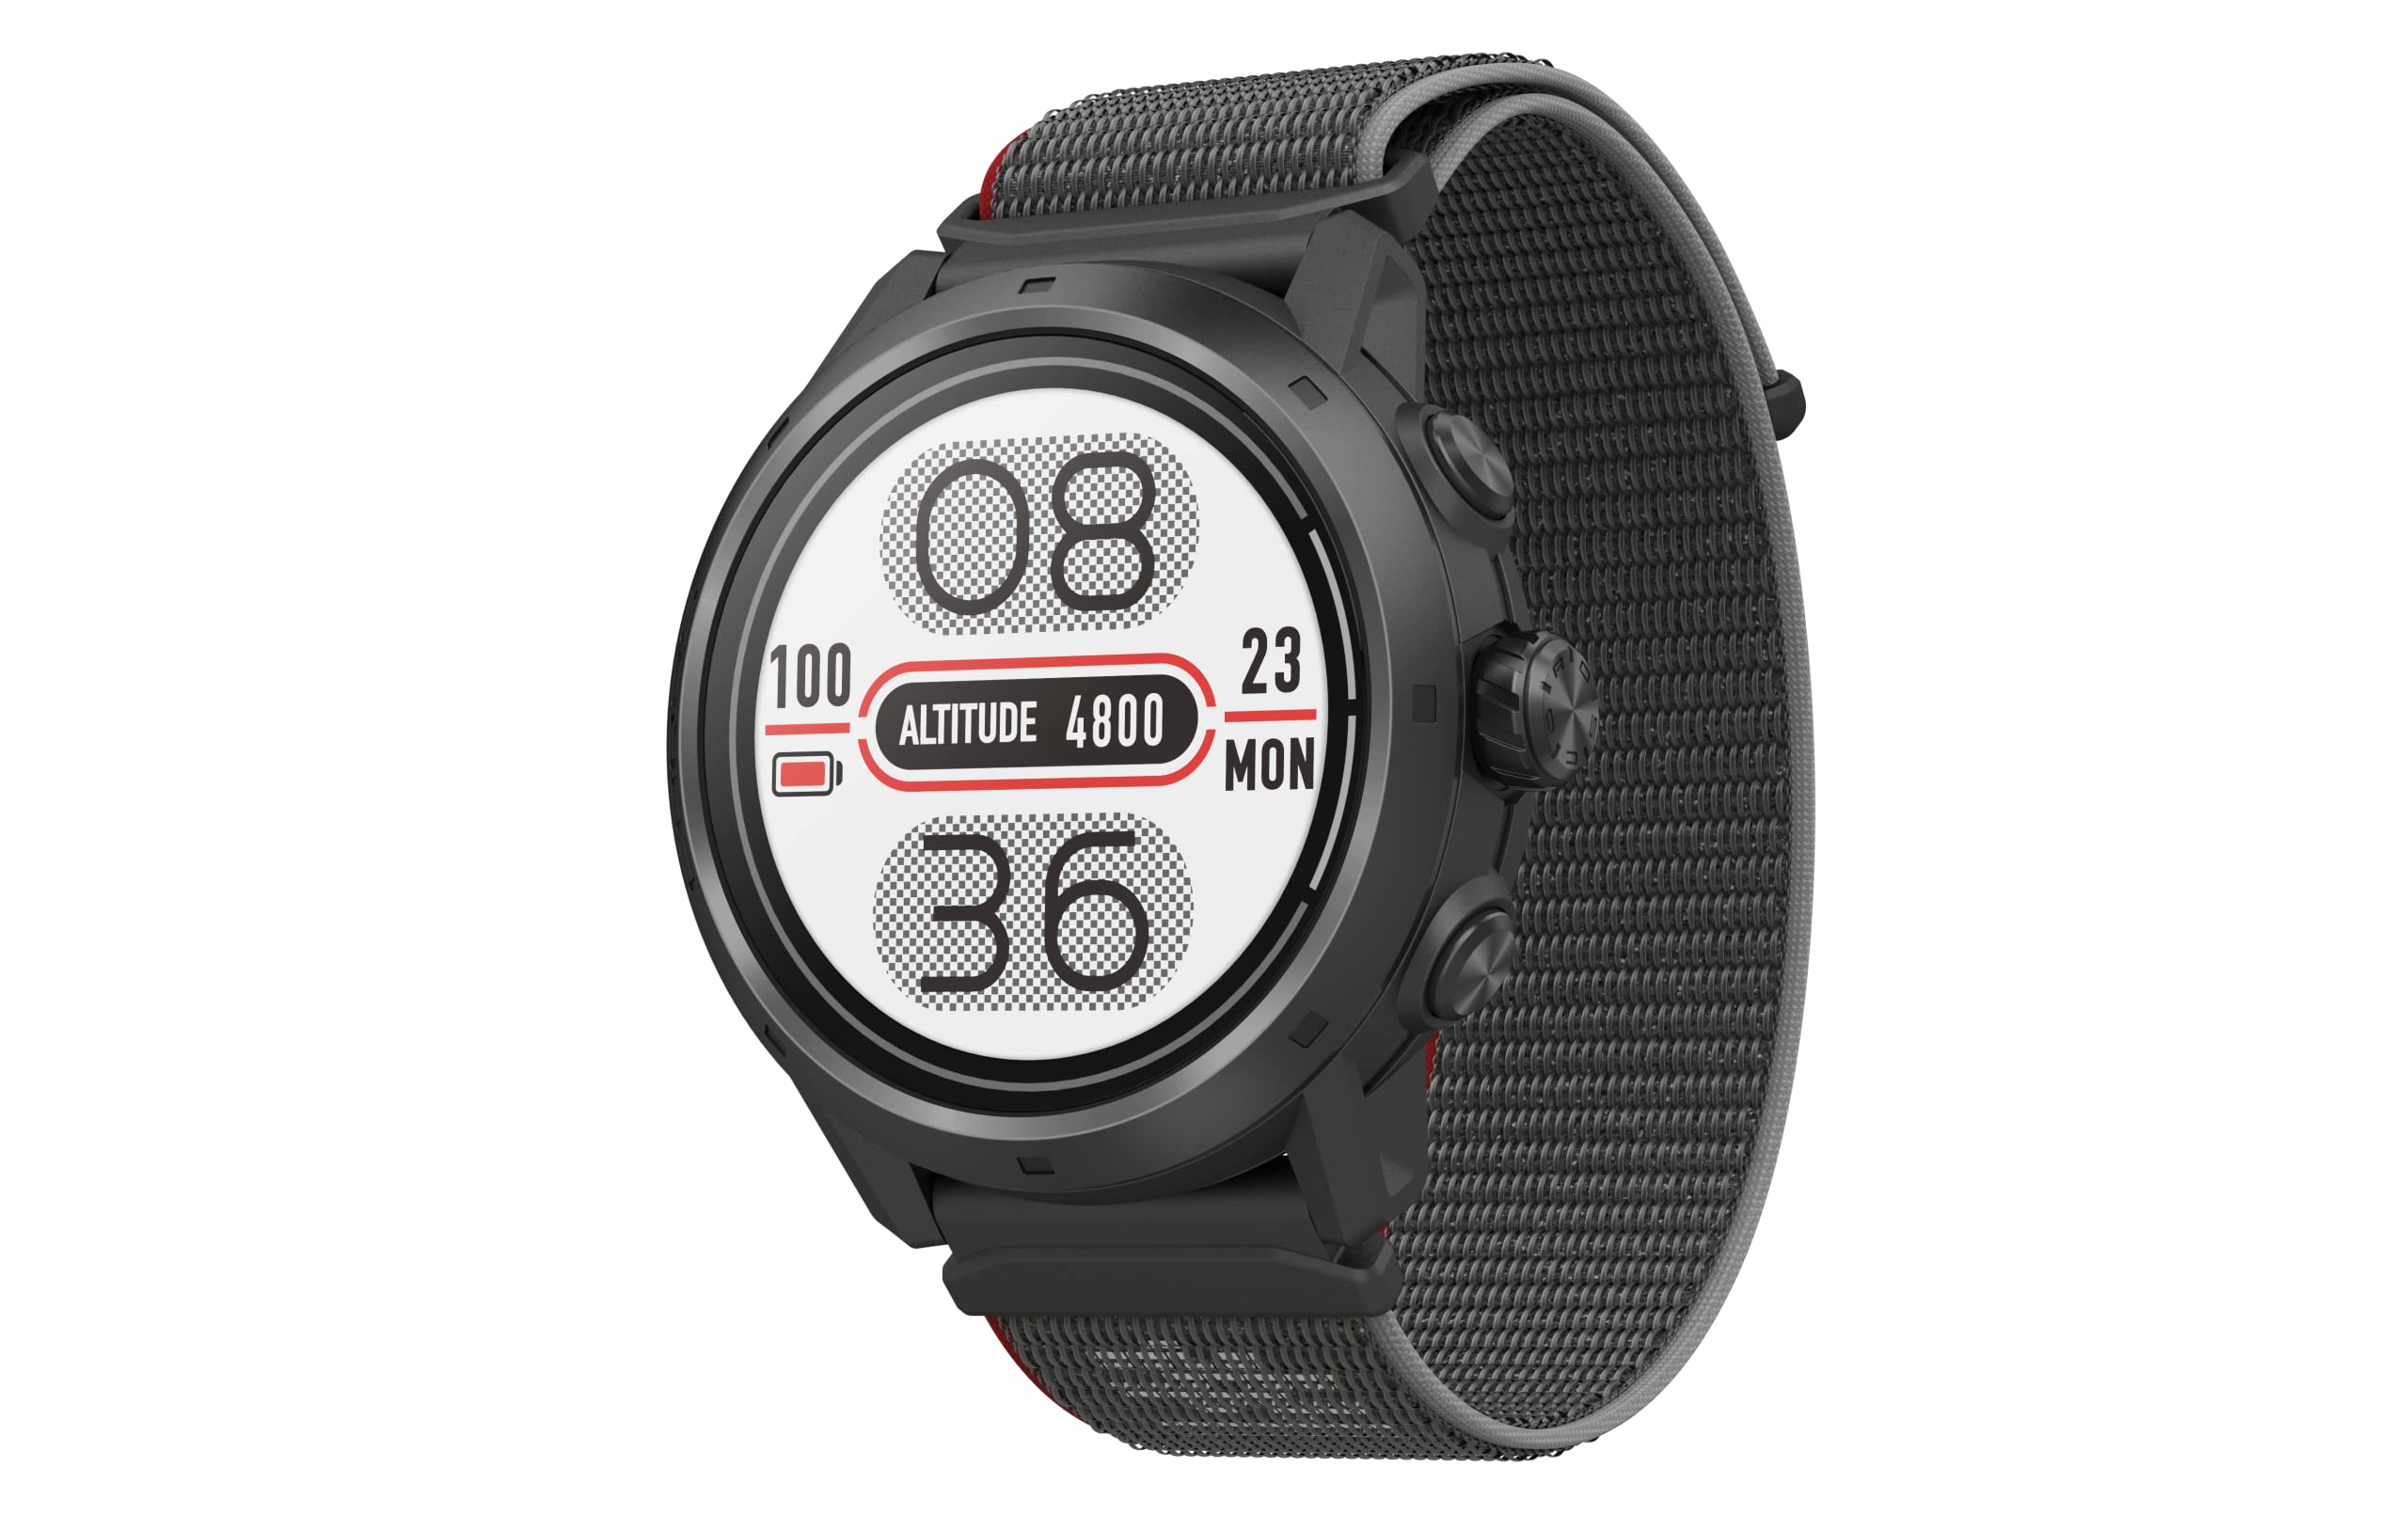 cOROS APEX 2 Pro gPS Outdoor Running Watch with Next-gen Heart Rate Monitor, Dual Frequency gNSS, 75 Hrs gPS Battery, 30 Day Reg